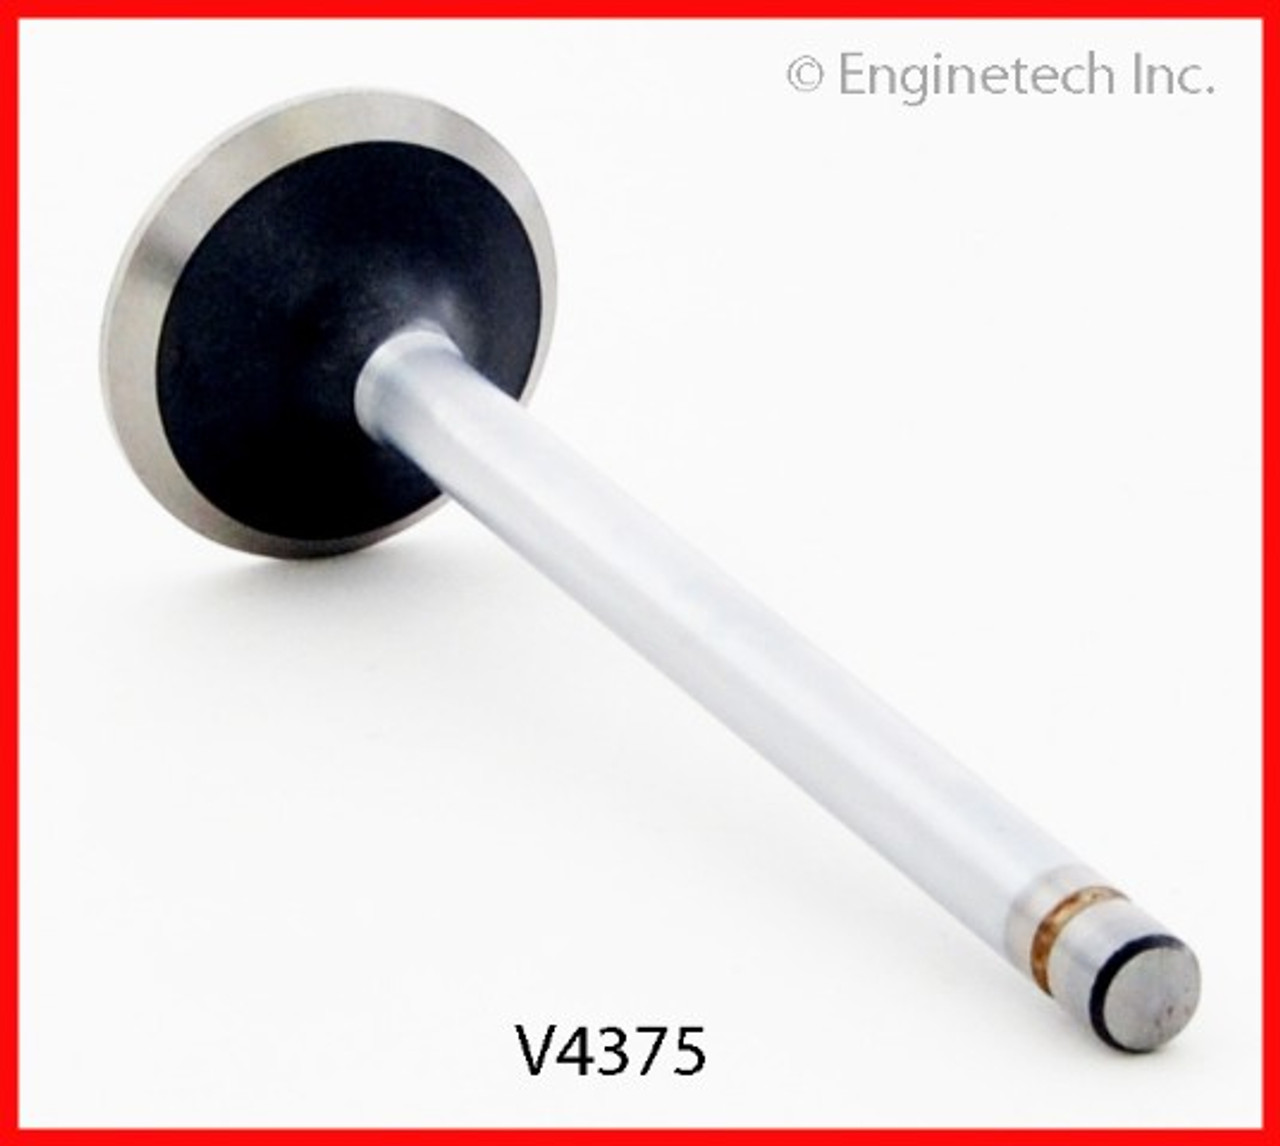 Exhaust Valve - 2004 Ford F-250 Super Duty 6.0L (V4375.A7)